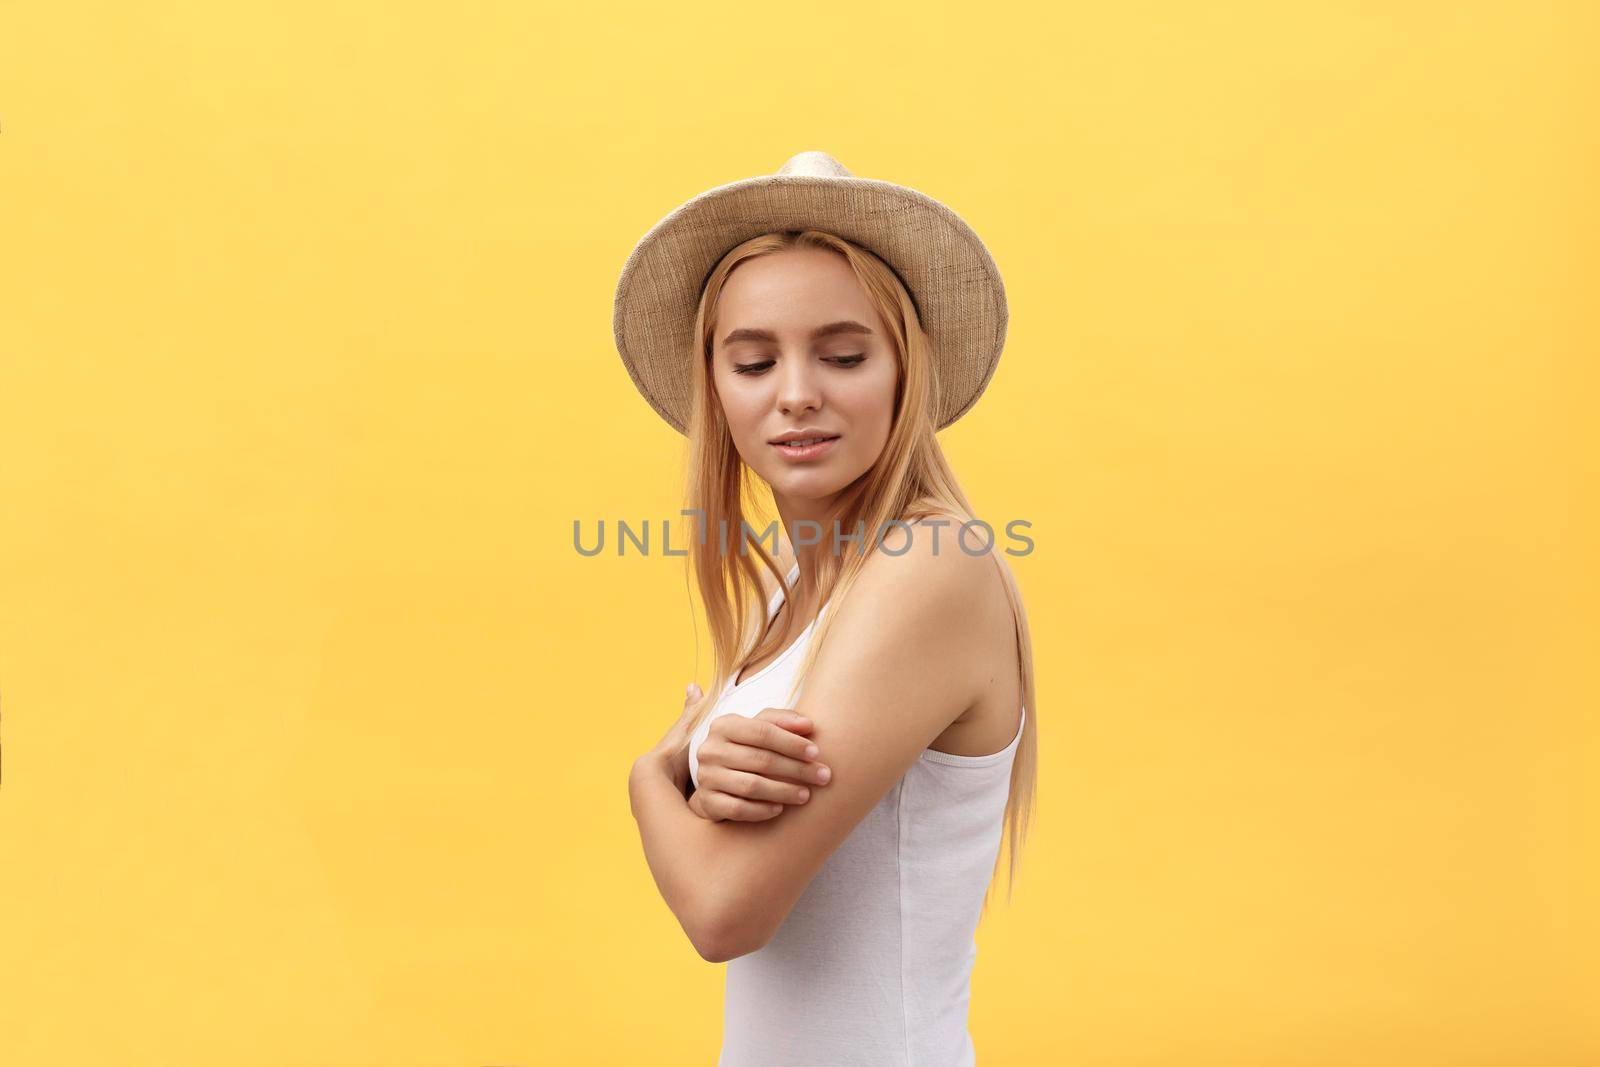 Laughing woman with crossed arms looking at the camera over yellow background.